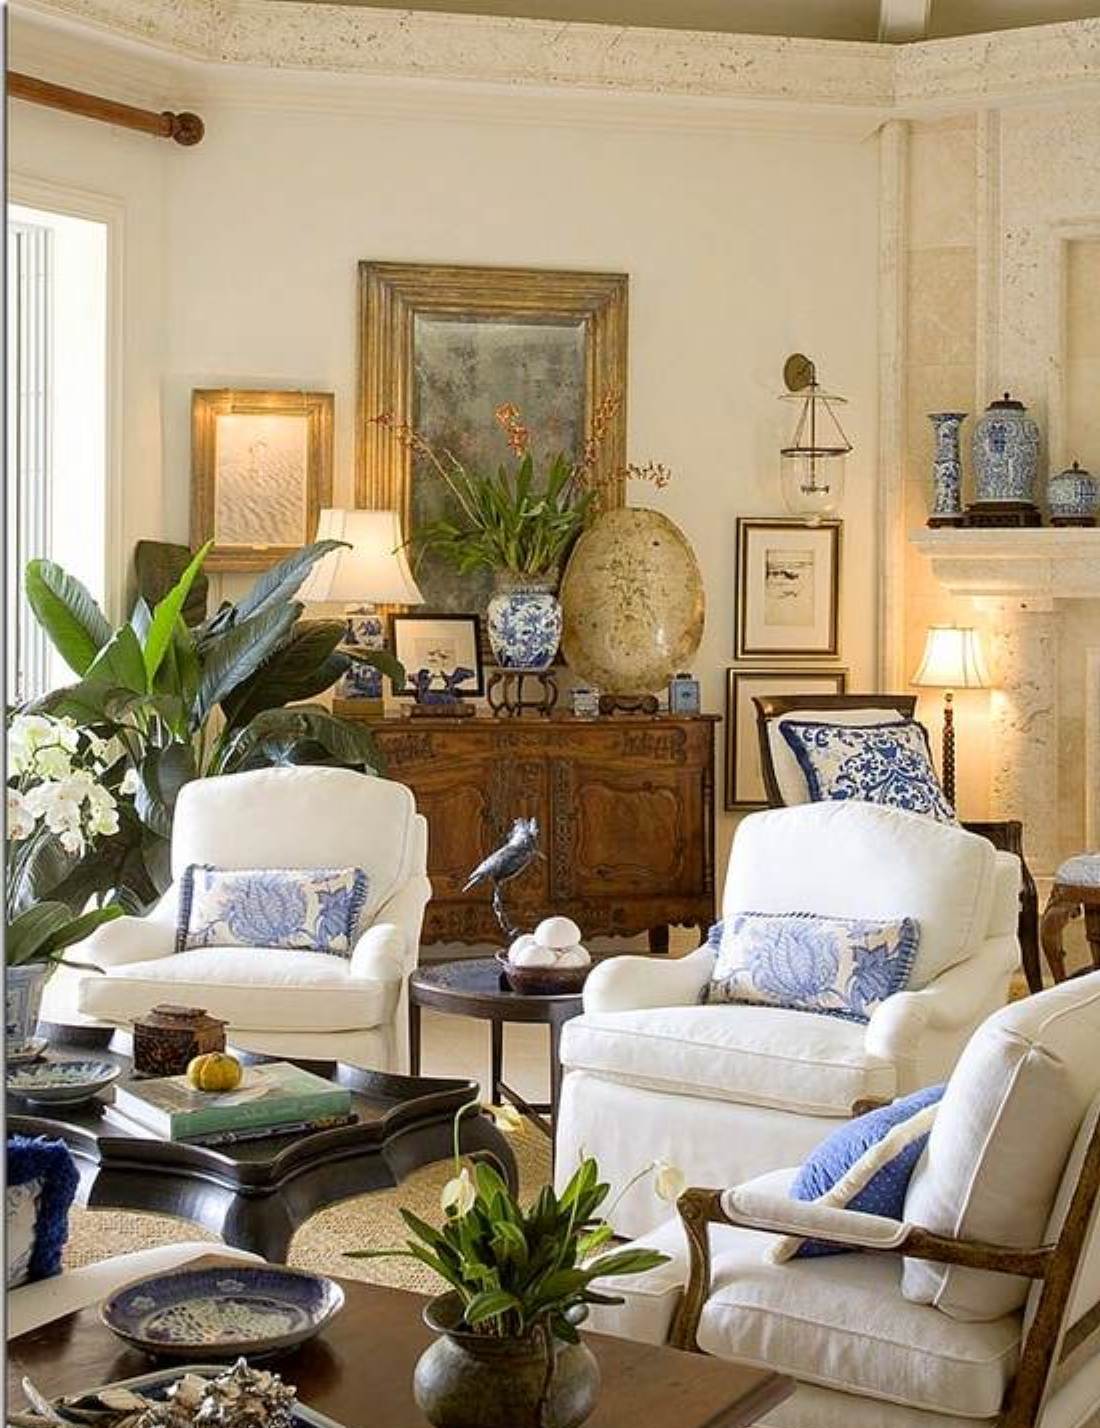 30 Great Traditional Living Room Design Ideas - Decoration Love